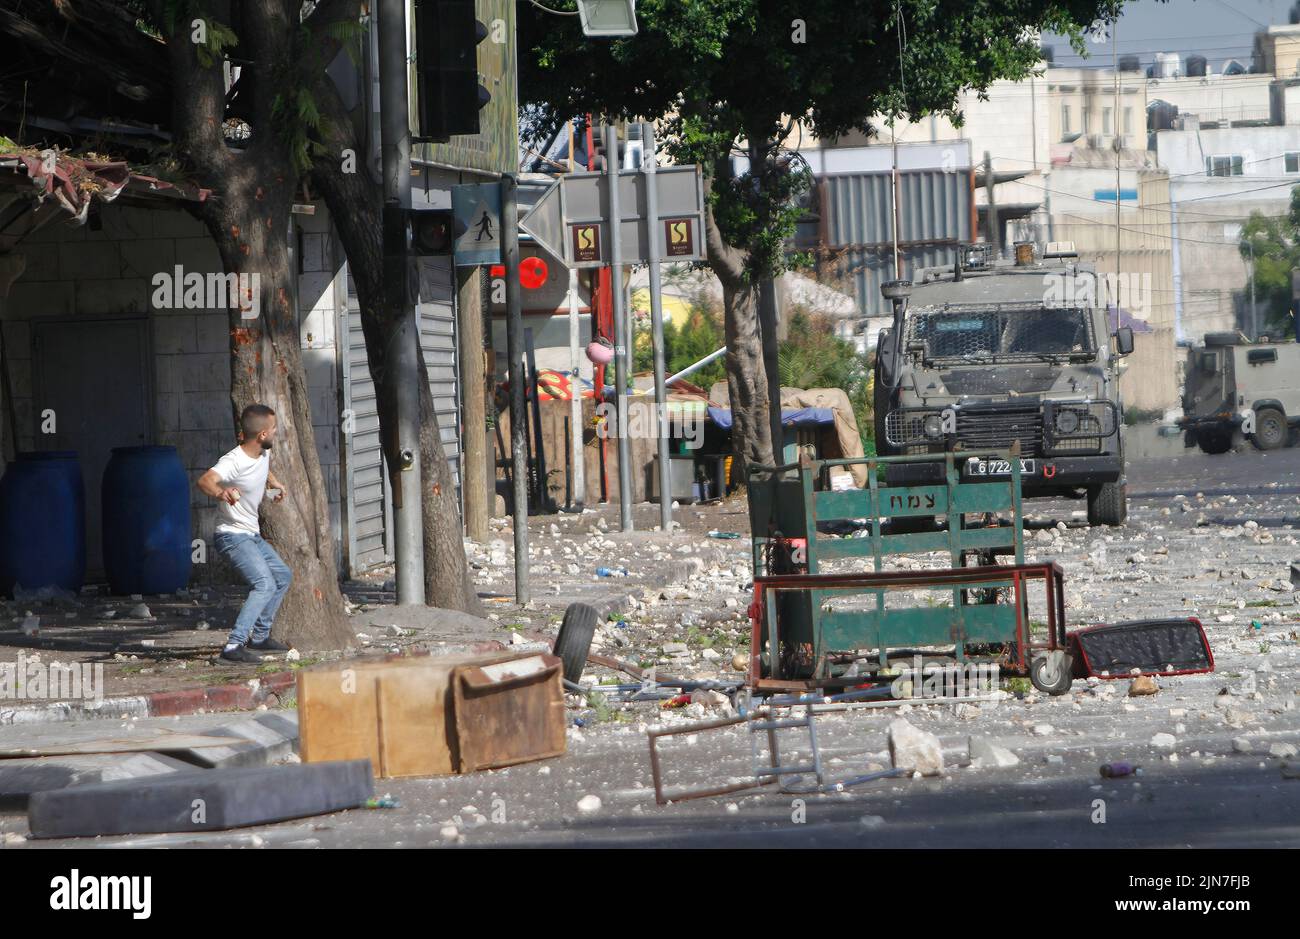 A Palestinian protester throws stones at military vehicles during the clashes with Israeli army forces after a raid in the Old City of Nablus in the occupied West Bank, the Palestinian Ministry of Health said that 3 Palestinians killed during the raid. (Photo by Nasser Ishtayeh / SOPA Images/Sipa USA) Stock Photo